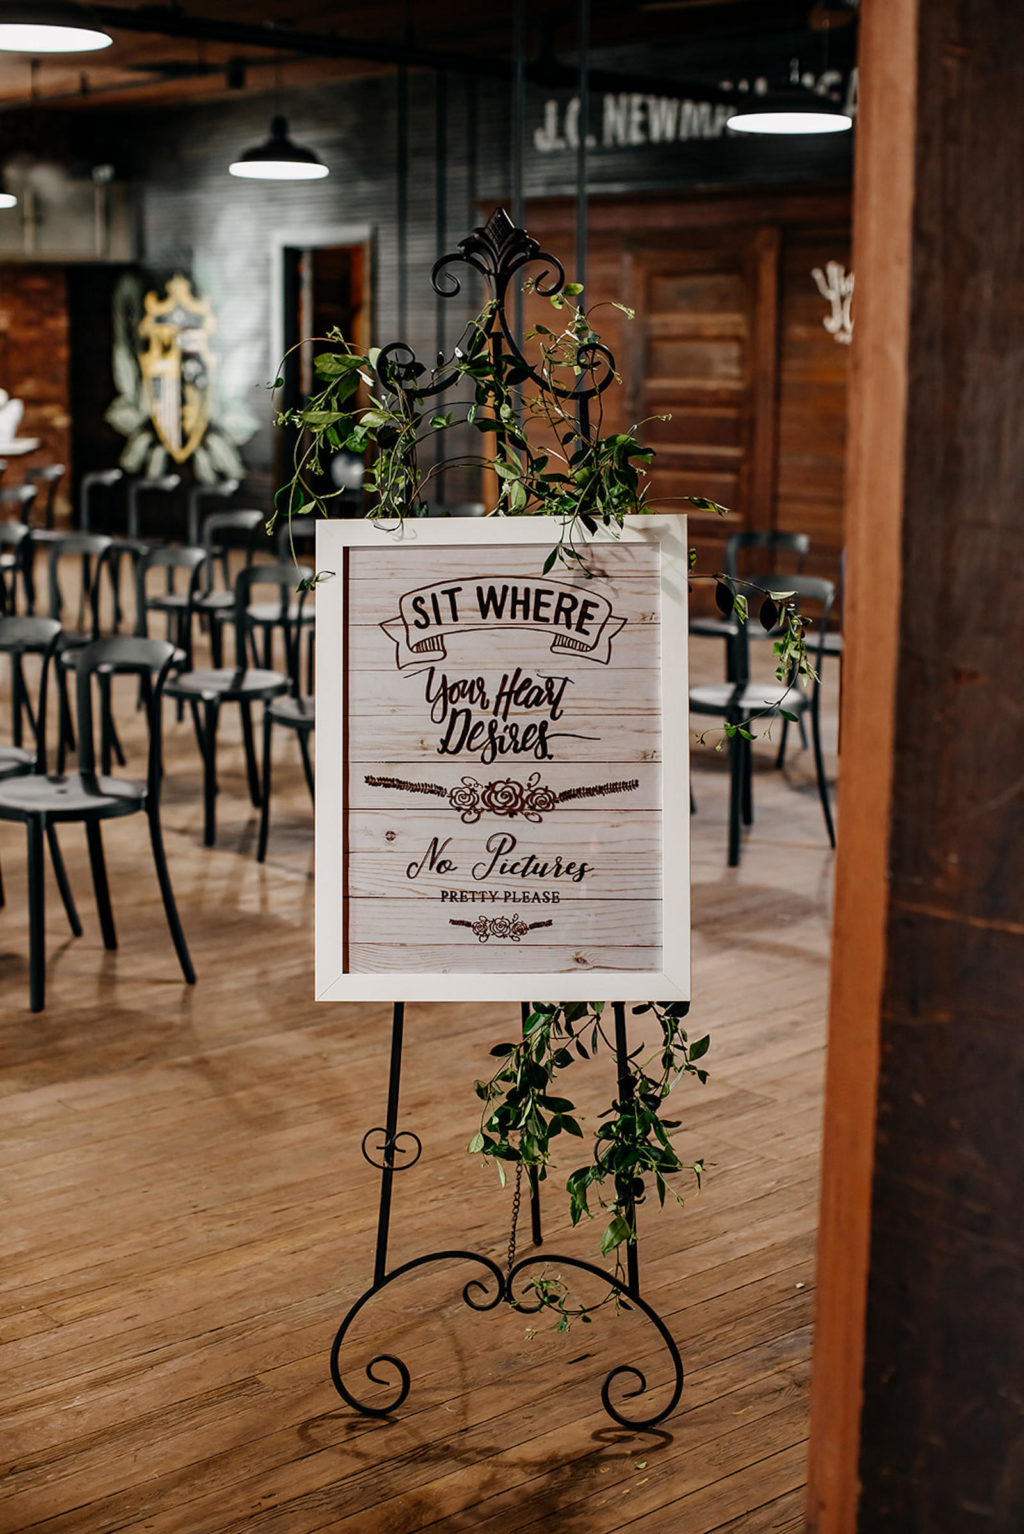 Vintage Inspired Tampa Bay Wedding Ceremony Decor, Wooden Welcome and No Cell Phone Ceremony Sign Sit Where Your Hear Desires No Pictures Please, Industrial venue decorated with Cascading Greenery, Ivy and Vines Wrapped Around Staircase | Unique Florida Wedding Venue J.C. Newman Cigar Co. in Ybor City